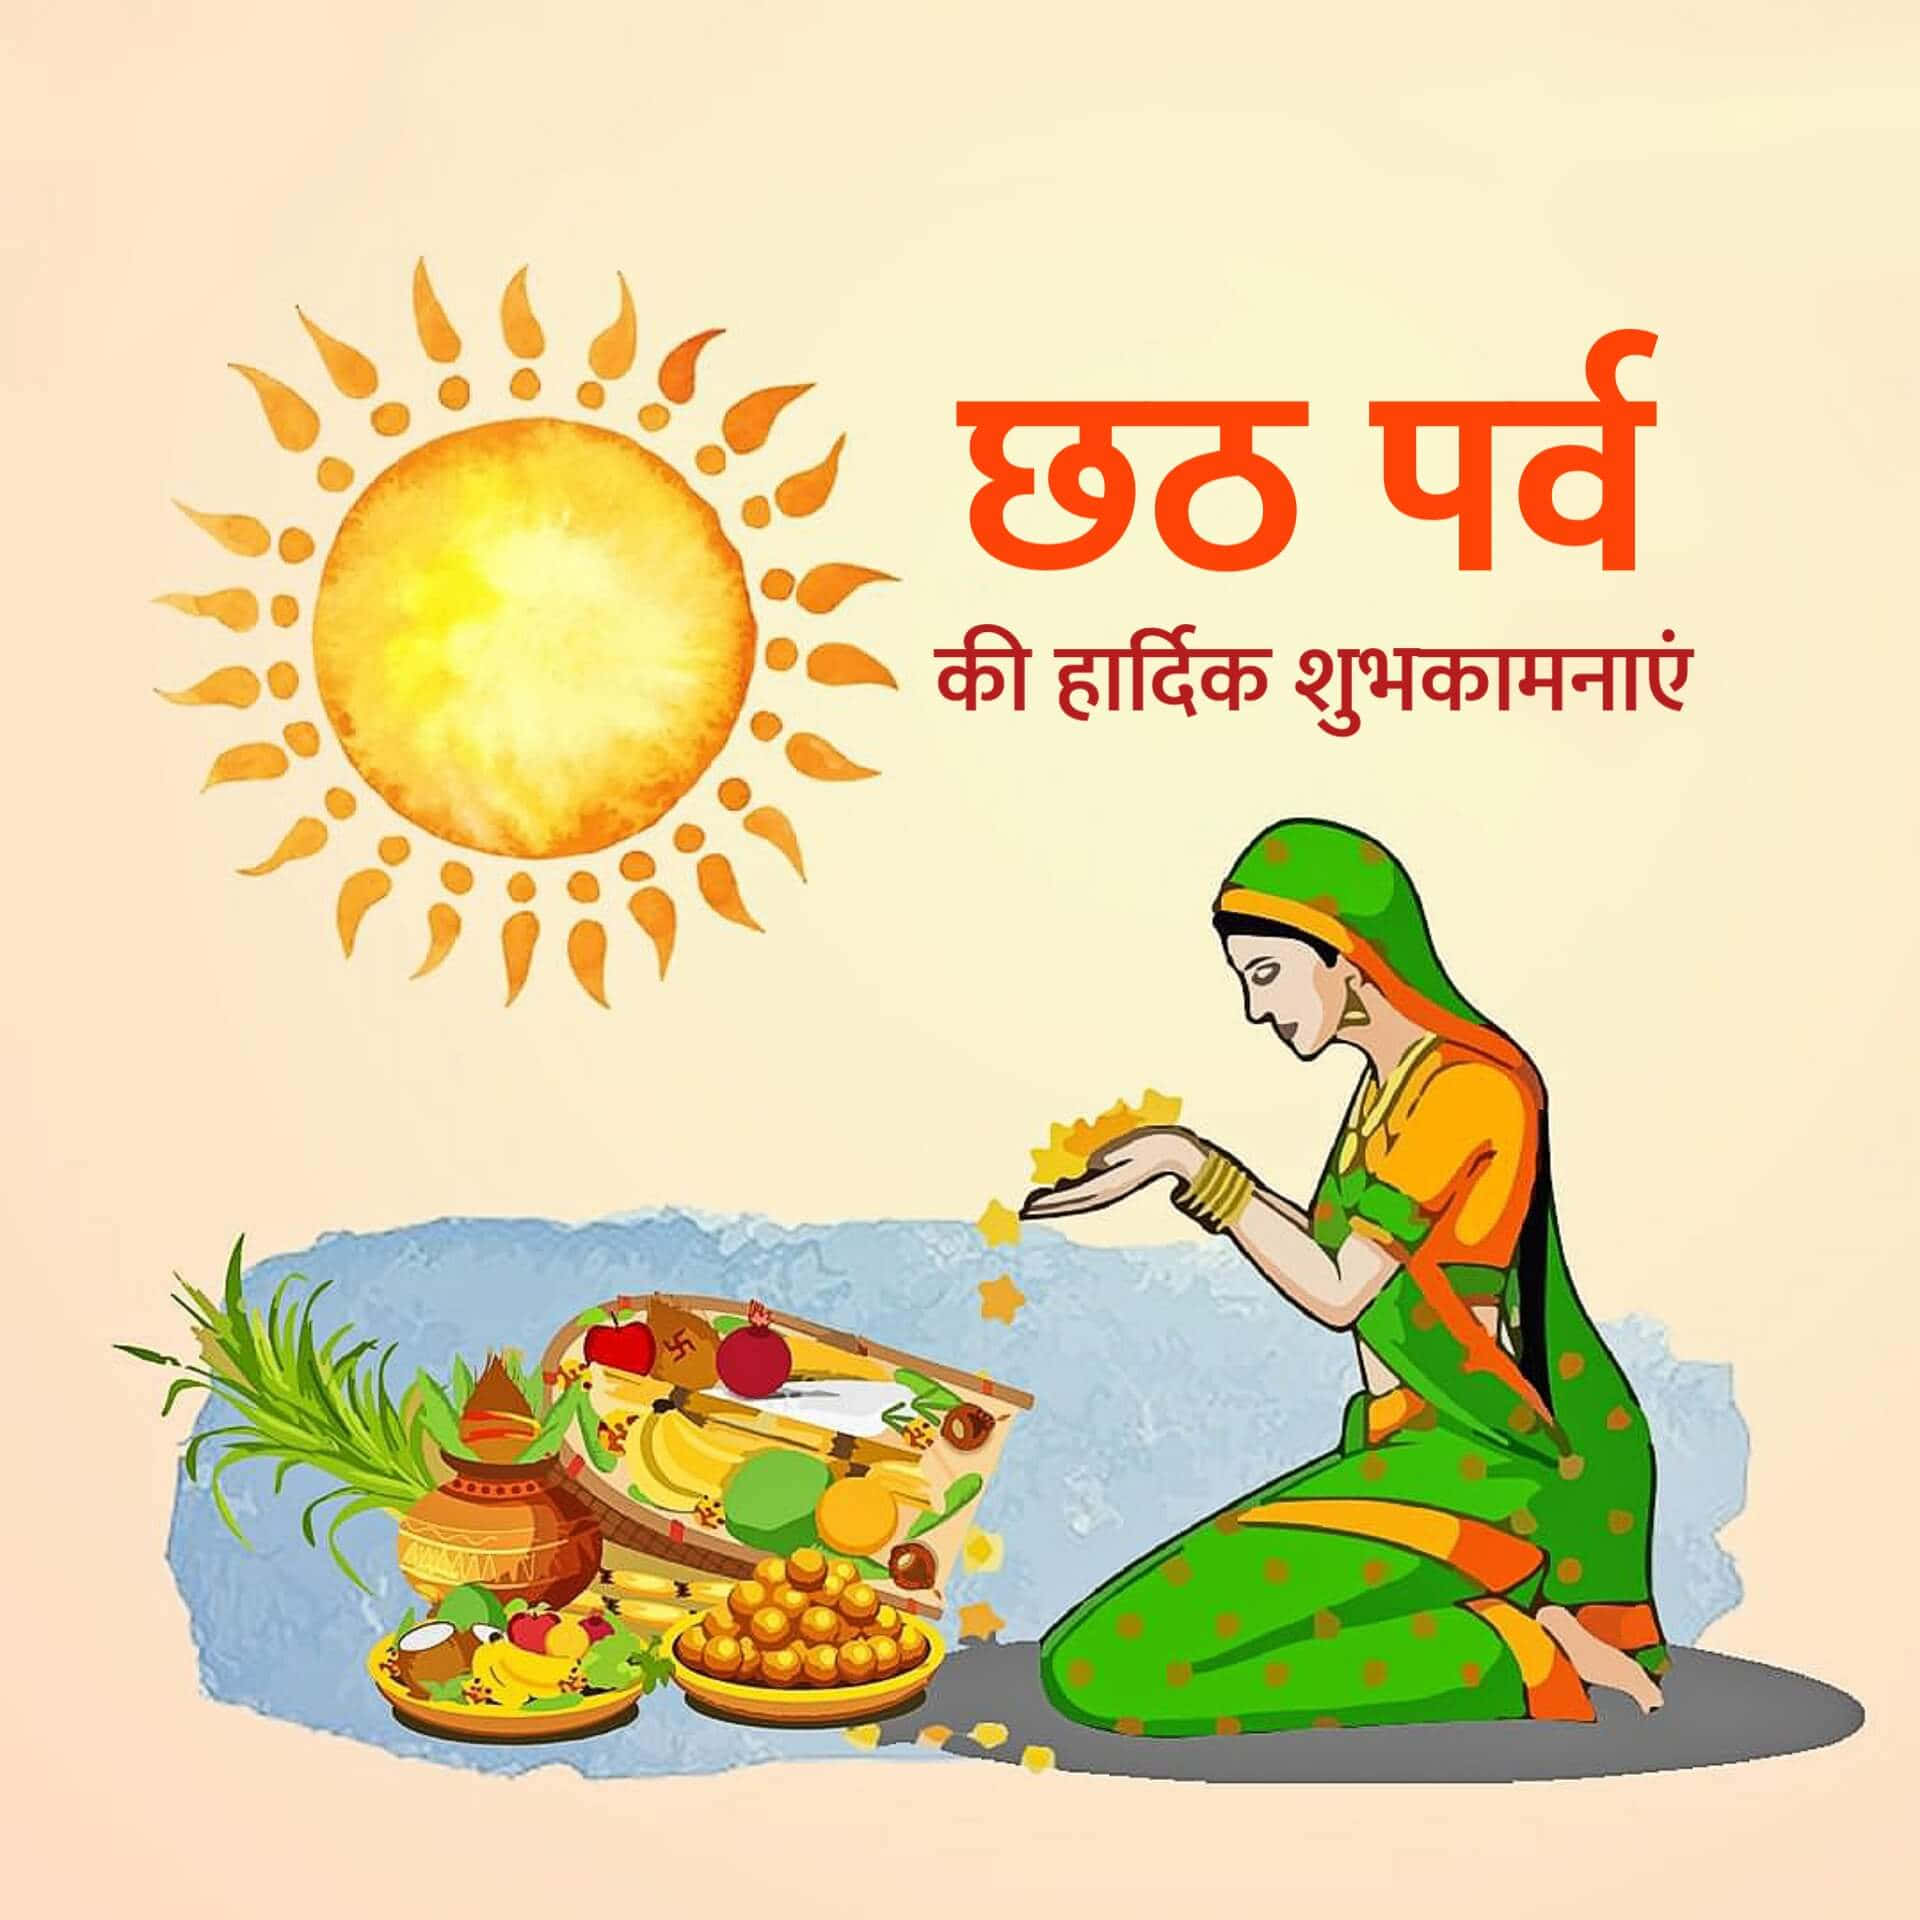 Devotees Honoring The Sun God During Chhath Puja